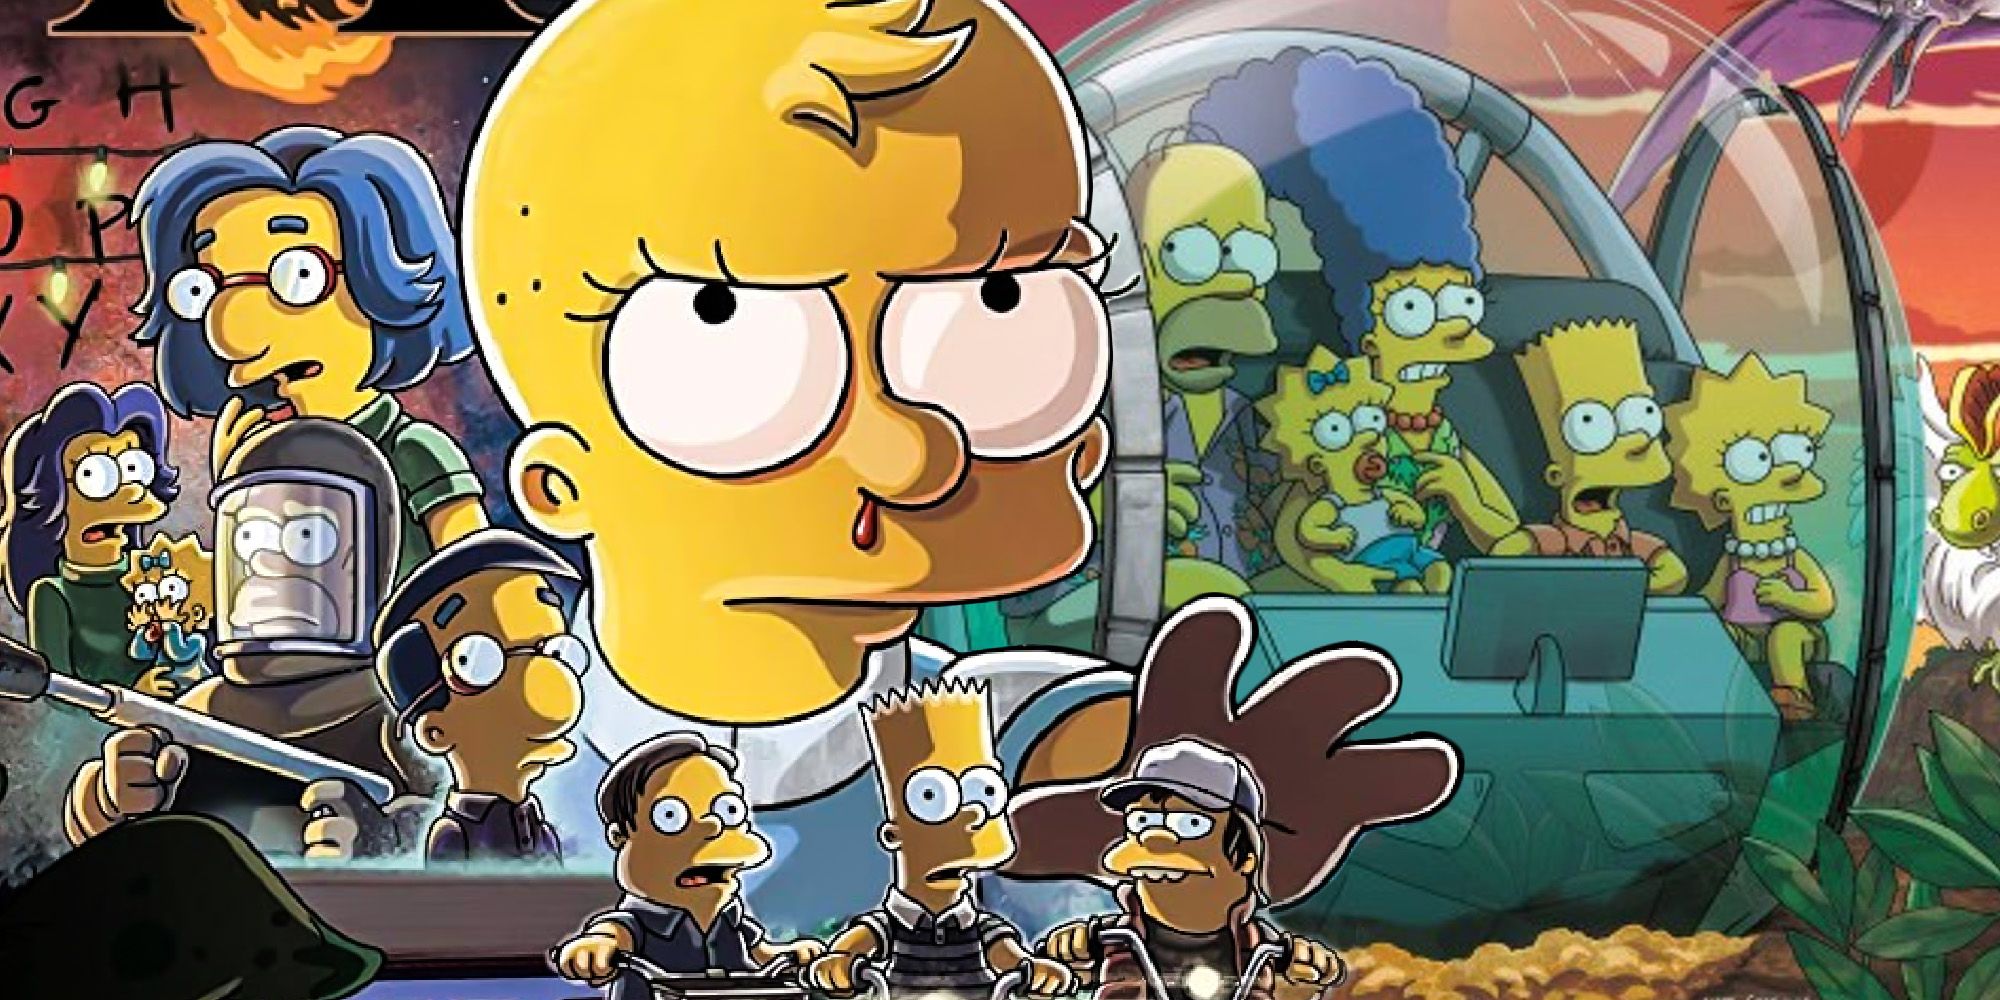 The simpsons Treehouse of horrors